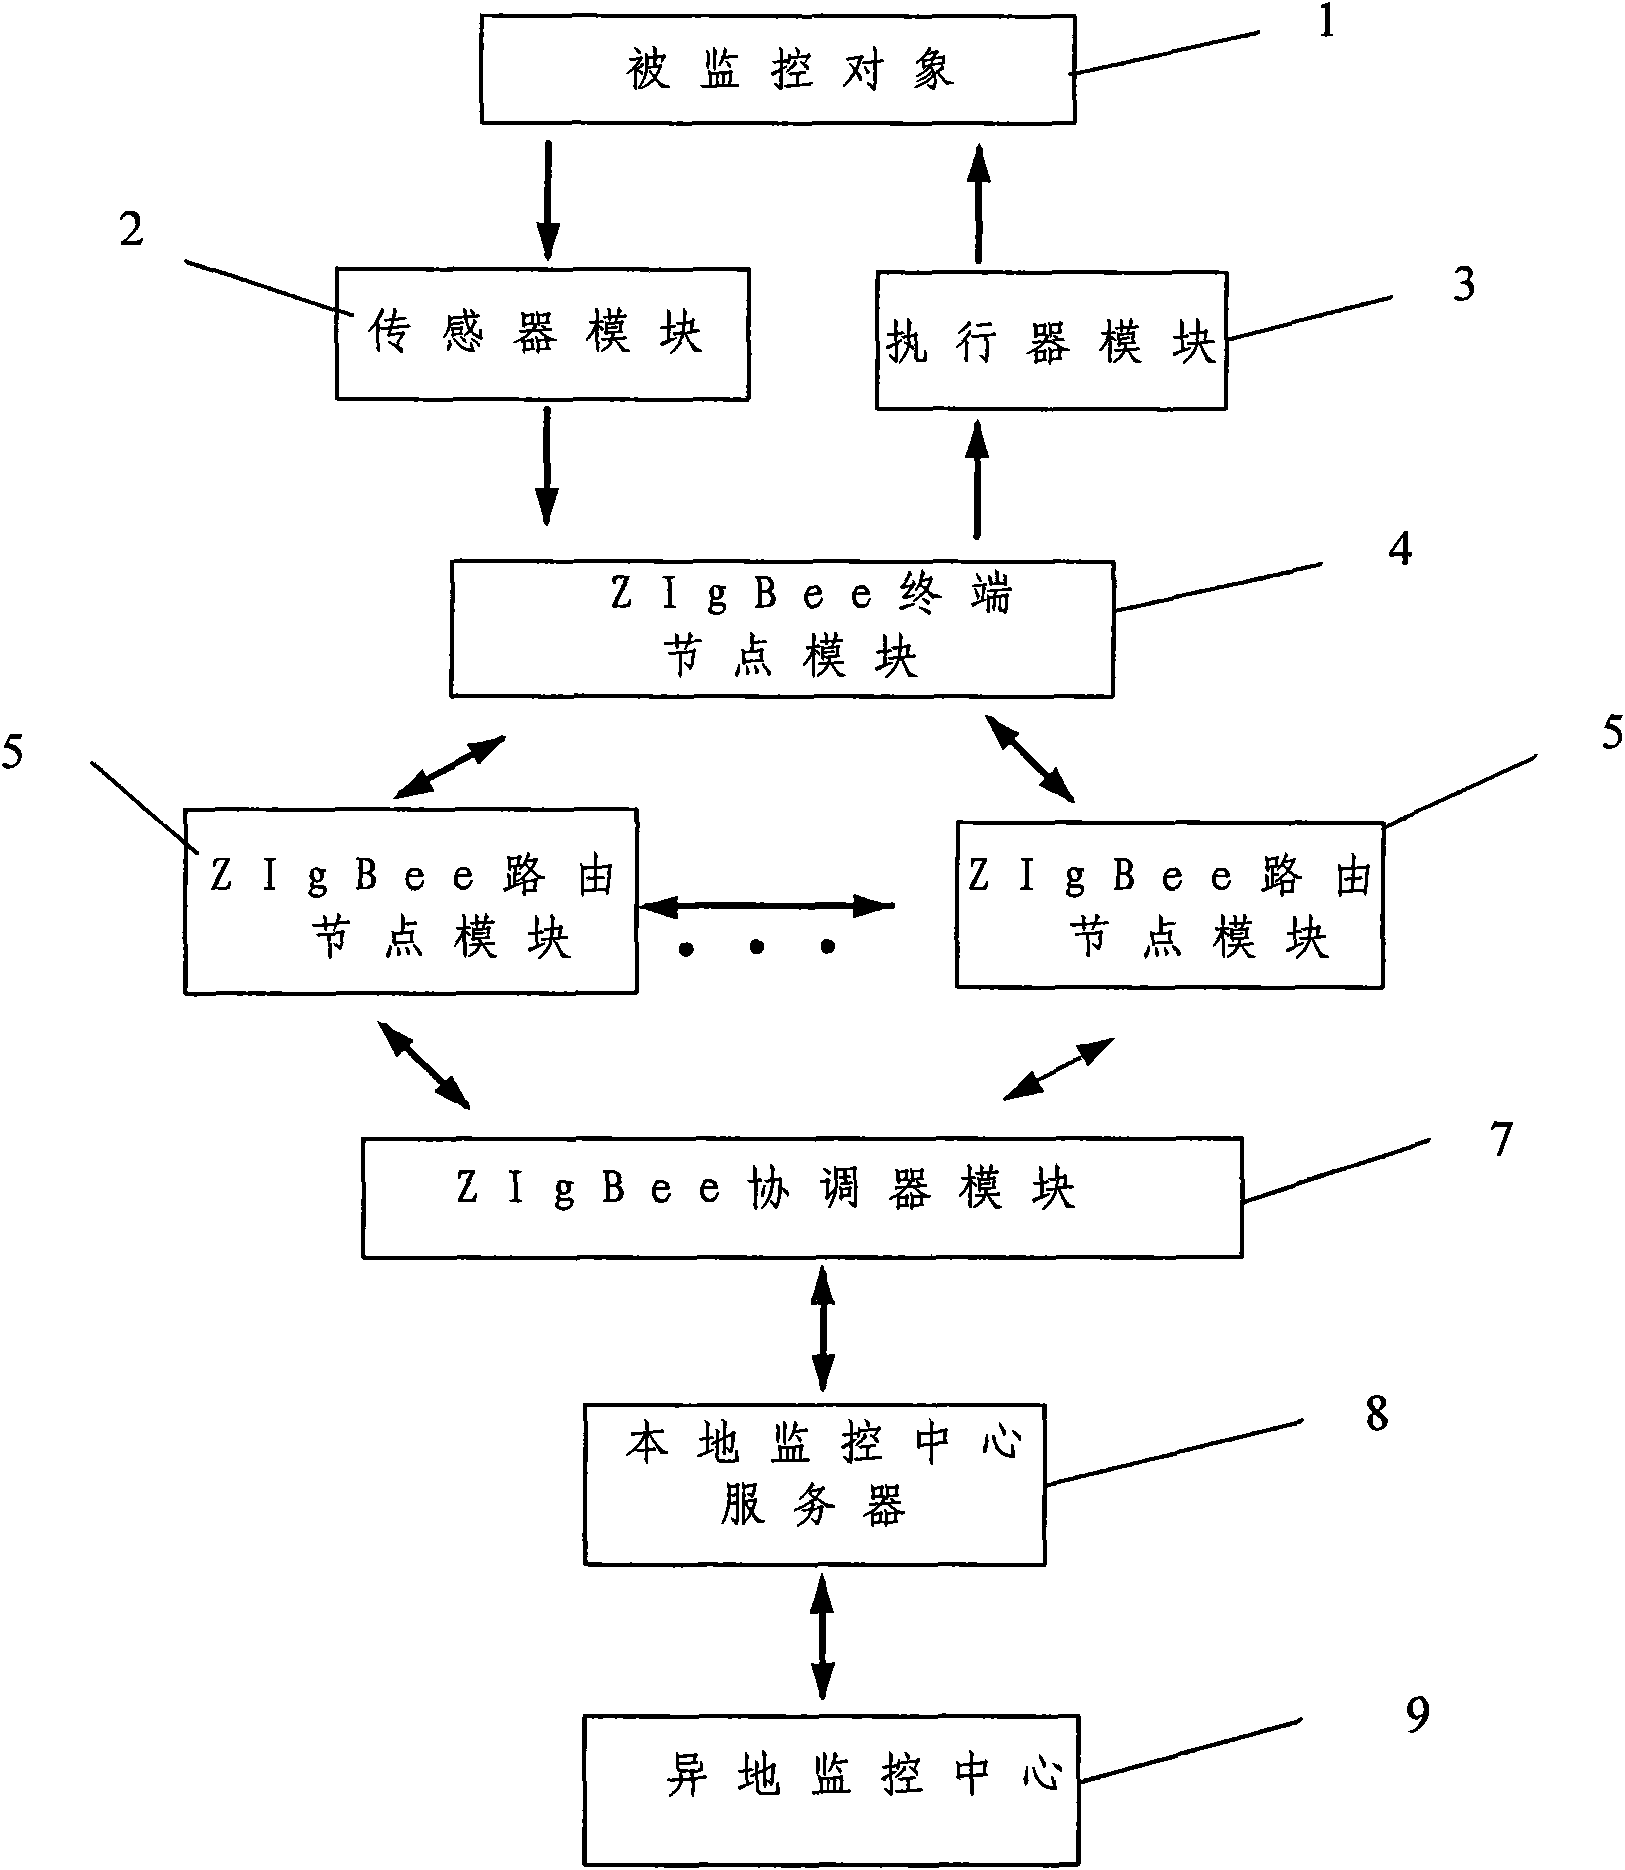 System and method for intelligent positioning and monitoring based on wireless communication and sensor network